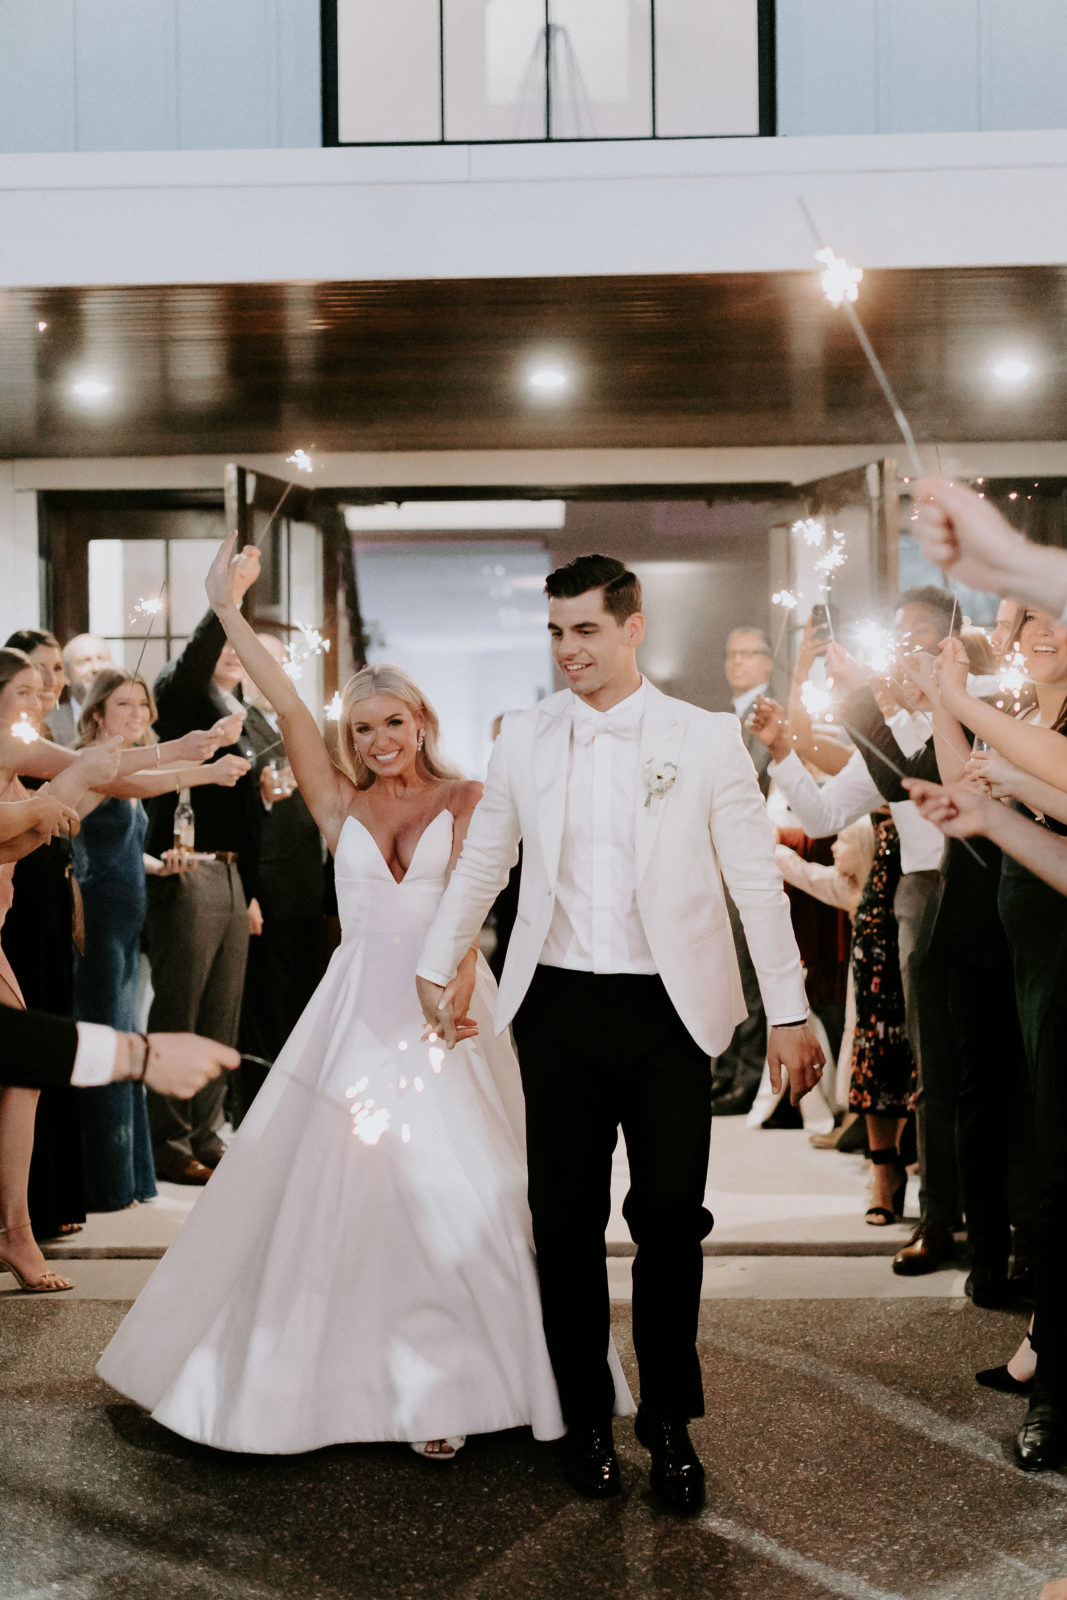 Chic white wedding ending in a sparkler send-off